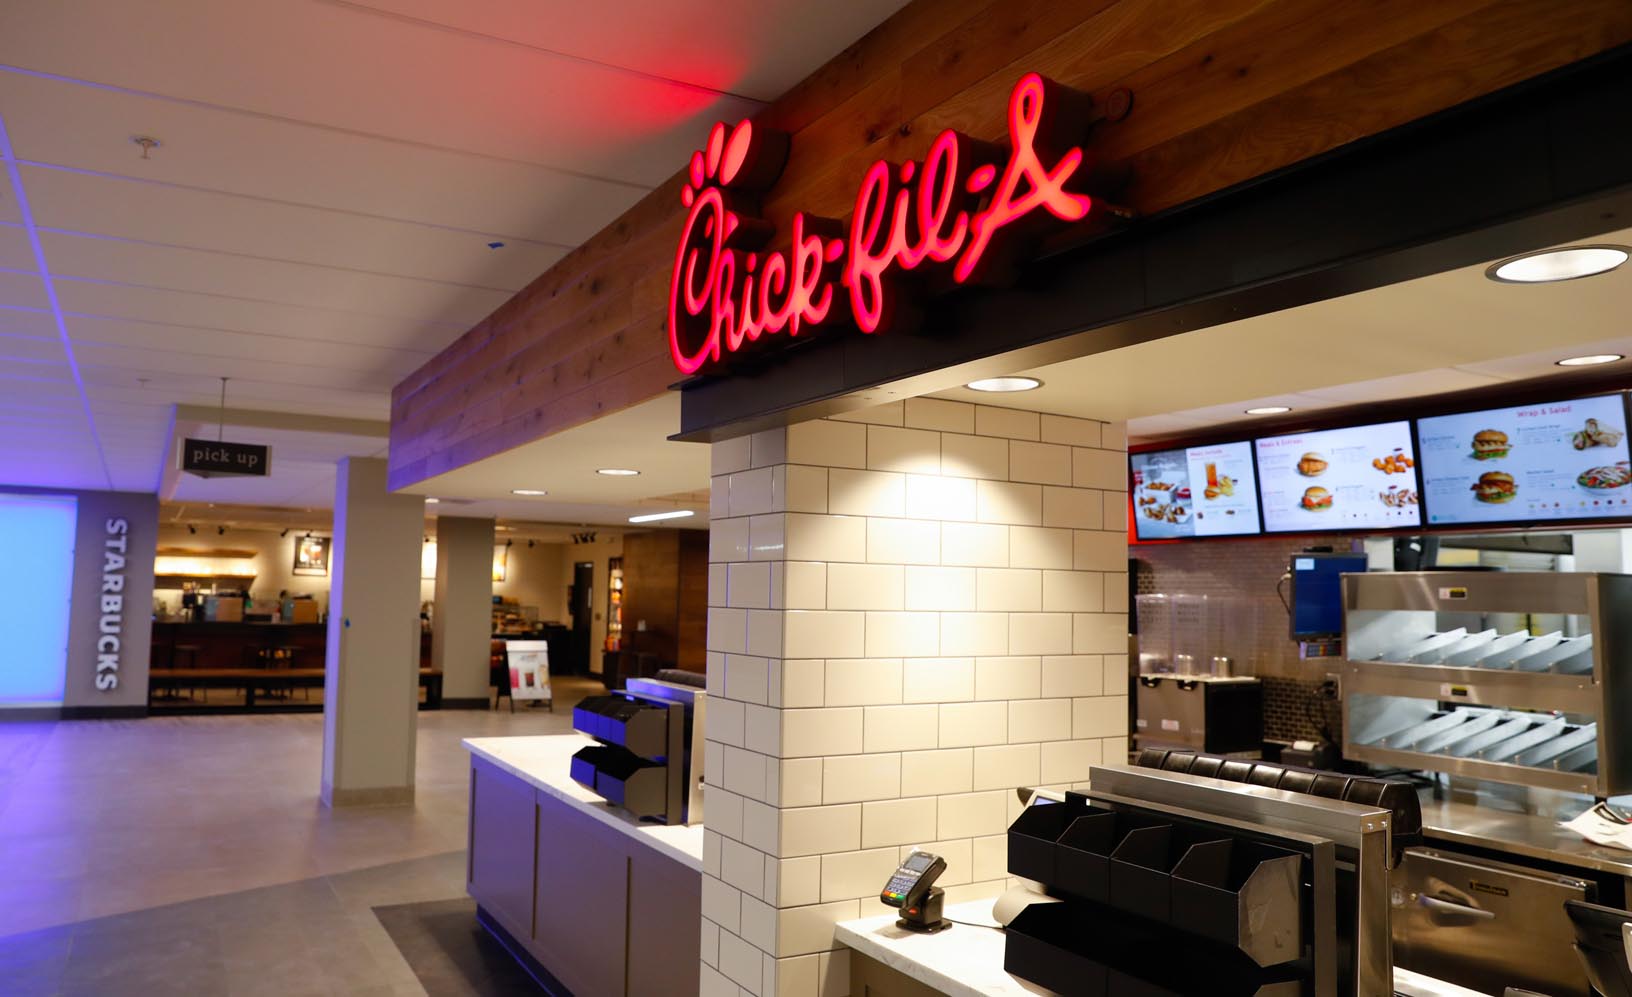 As Chick-fil-A opens, UNK students excited about union improvements